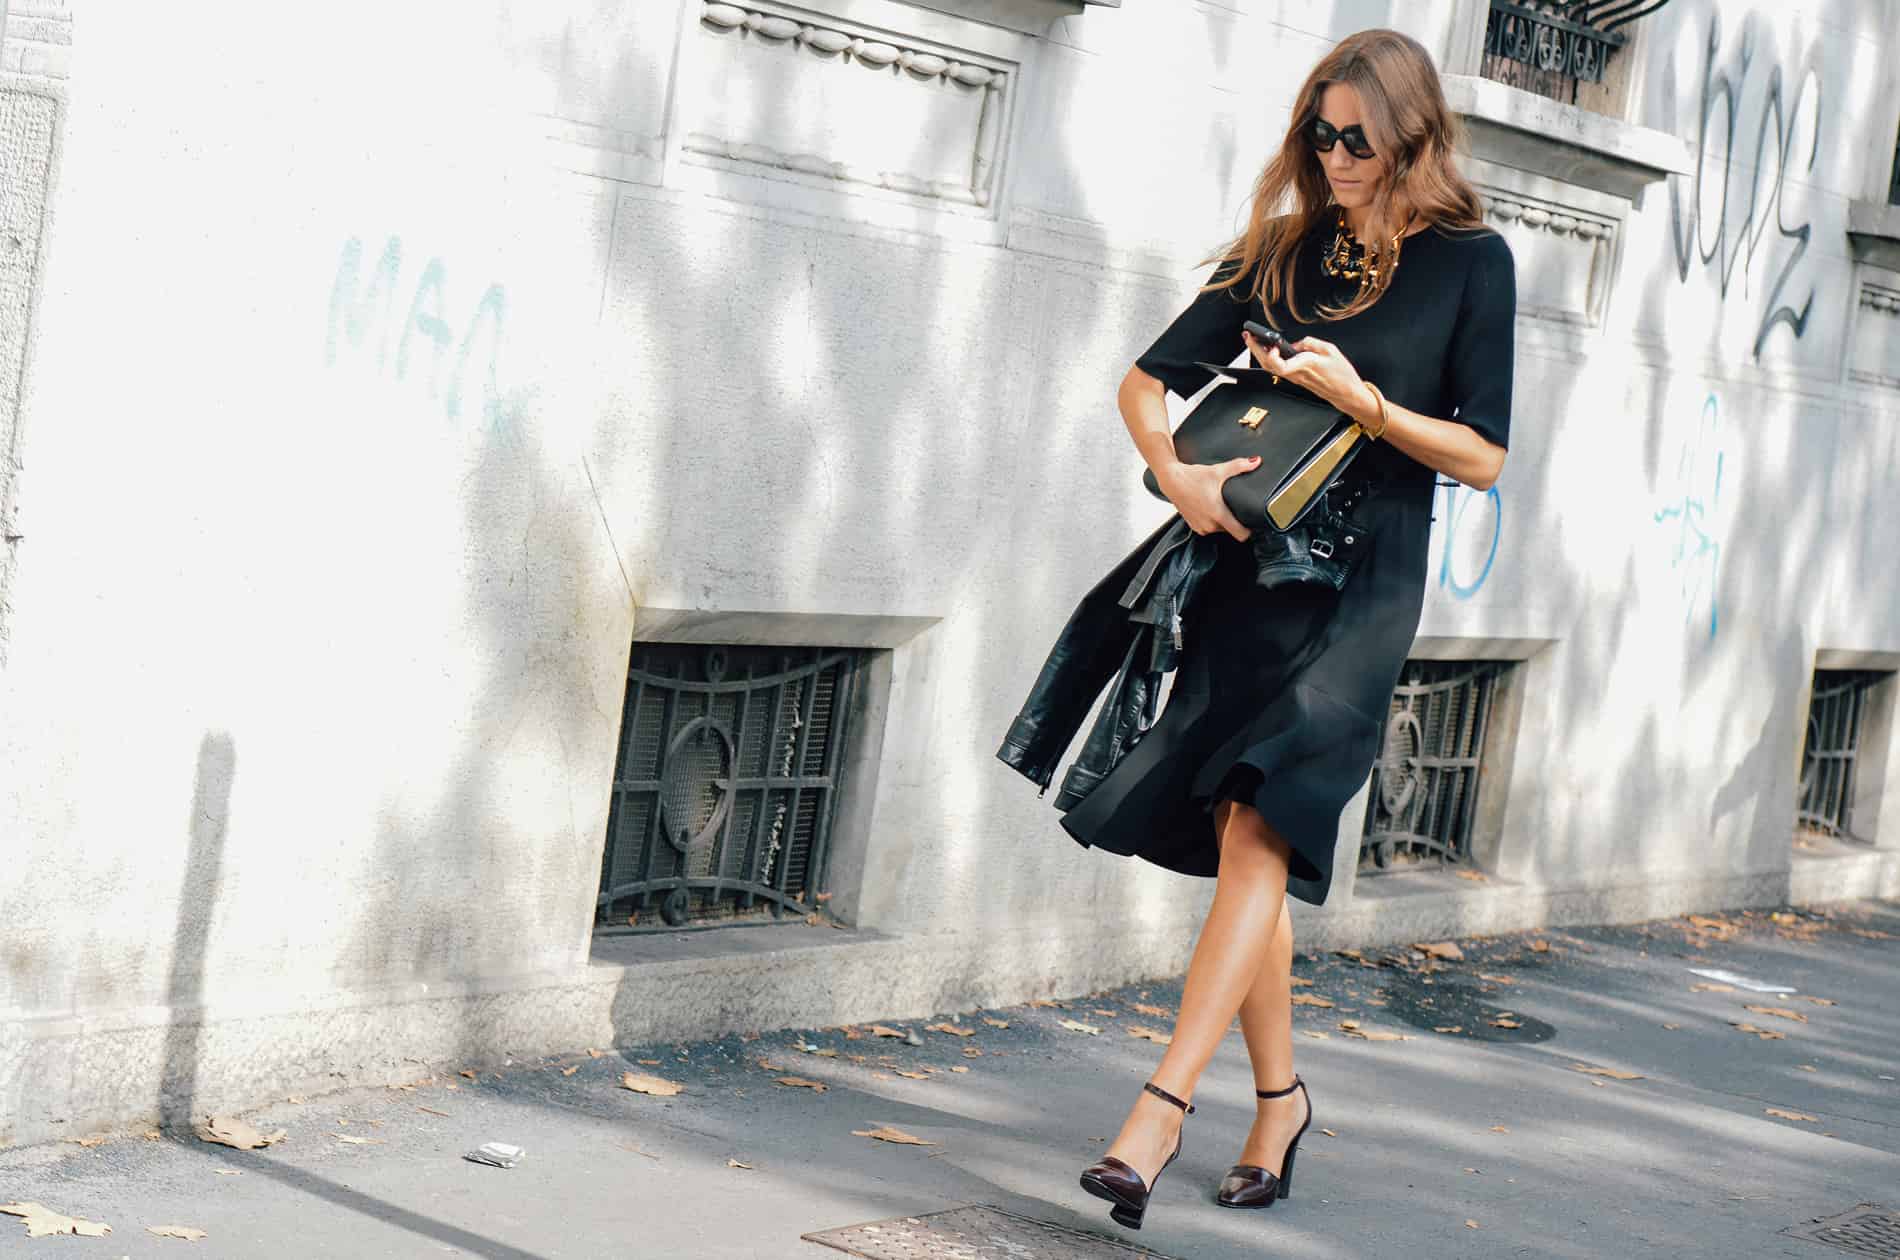 French Chic is all about decoding the Secrets of Paris Fashion, like this Parisian woman who's teamed a well-cut skirt and top with a sleek square handbag and gold statement necklace.